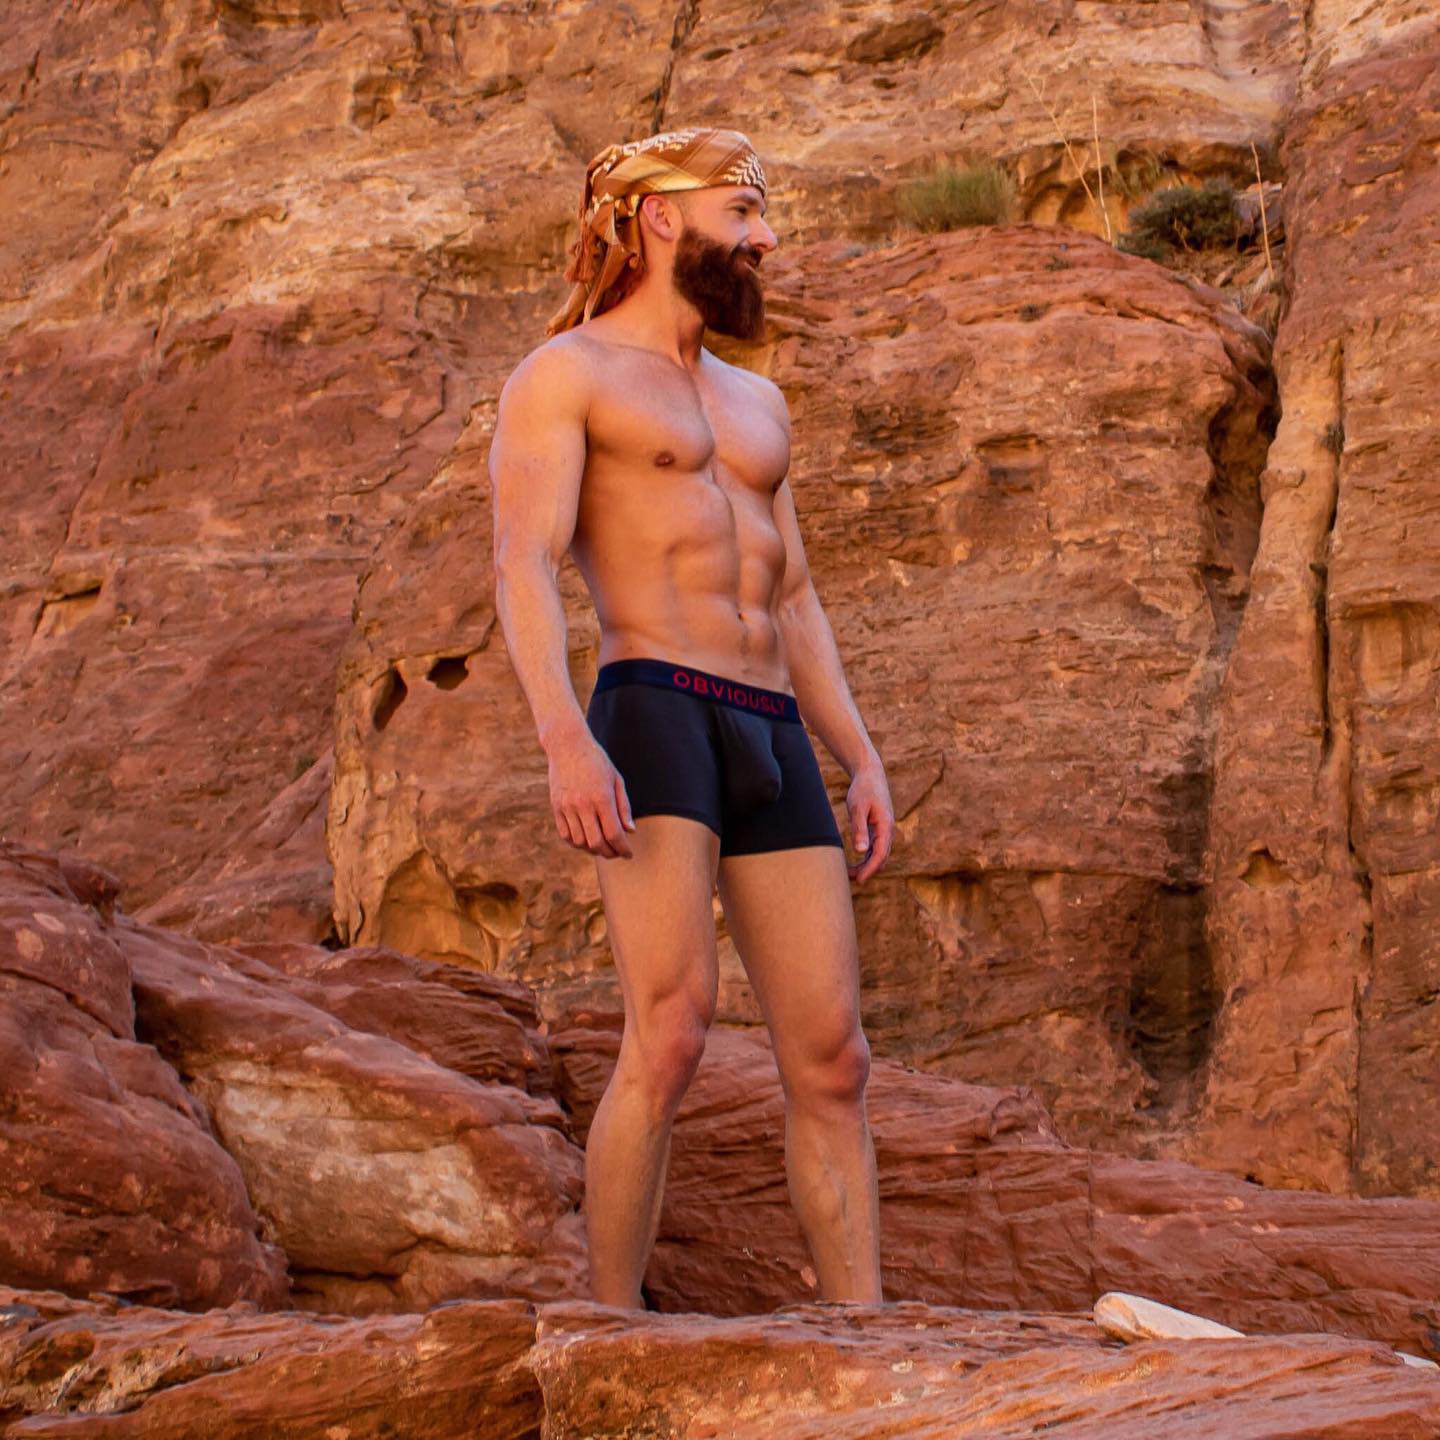 Meet the FreeMan Trunks featuring the AnatoFREE anatomical shape pouch, a trademark design made Obviously Apparel a world-renowned premium men's underwear brand. These trunks are made from the highest quality bamboo rayon and Lycra blend, which is breathable, moisture-wicking, and unbelievably soft and light on your skin. Check them out:
______
menandunderwear.com/shop